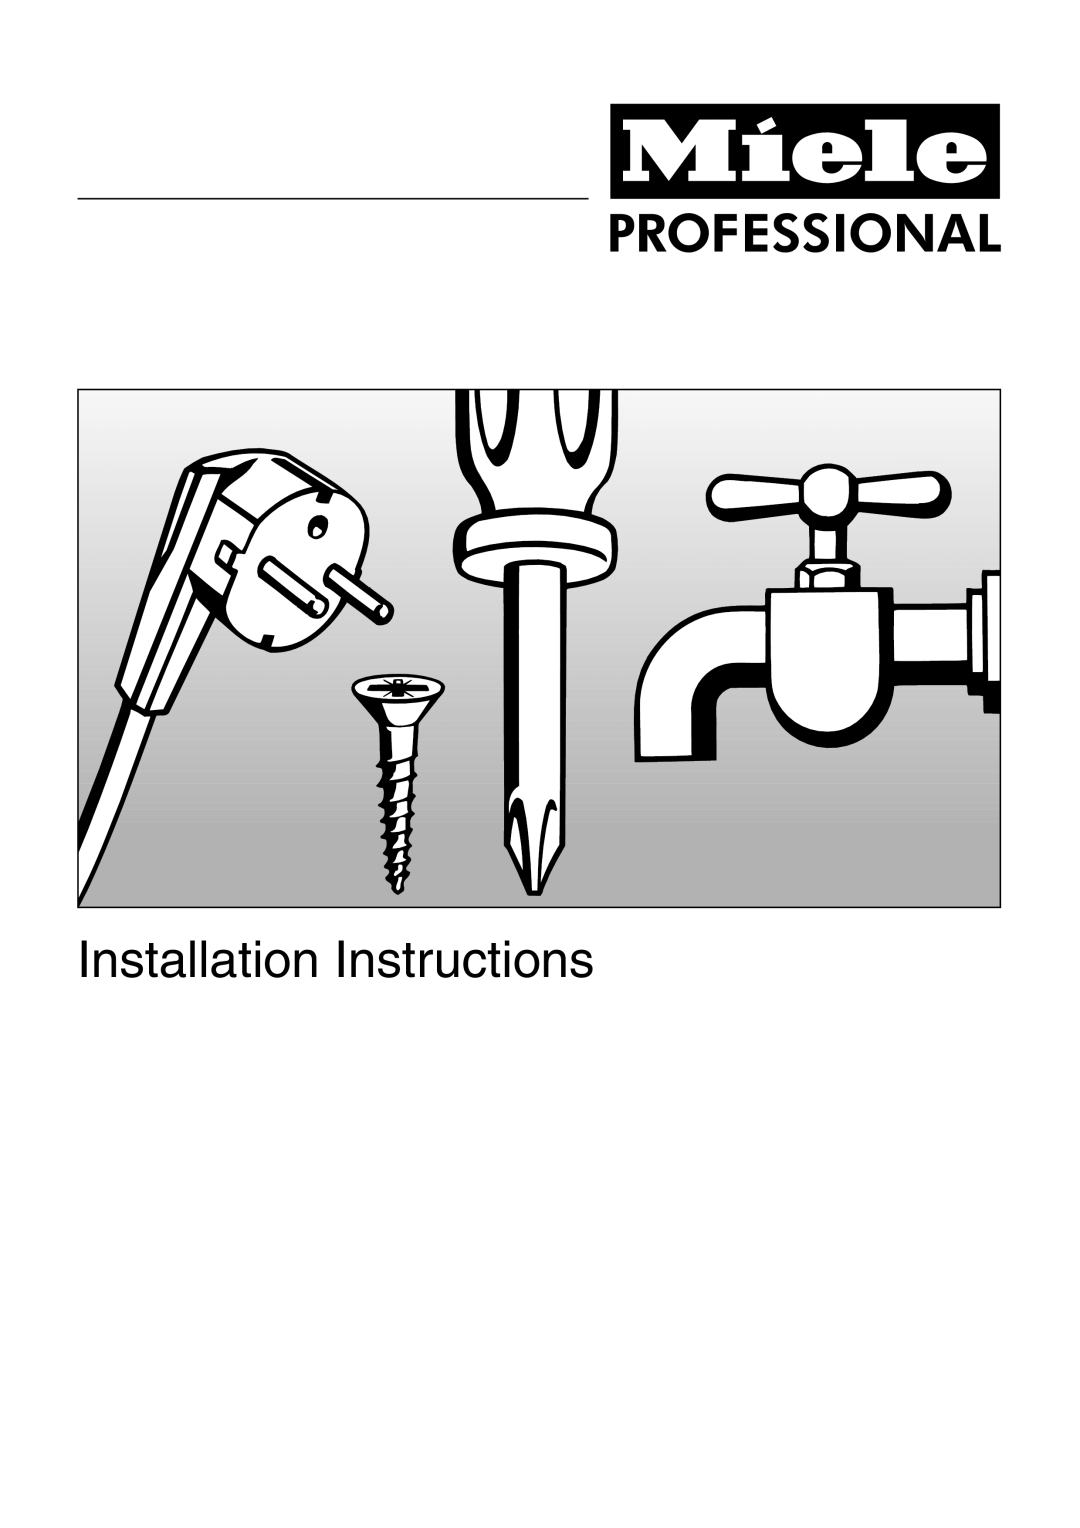 Miele PW 6101, PW 6161, PW 6131, PW 6201 operating instructions Installation Instructions 